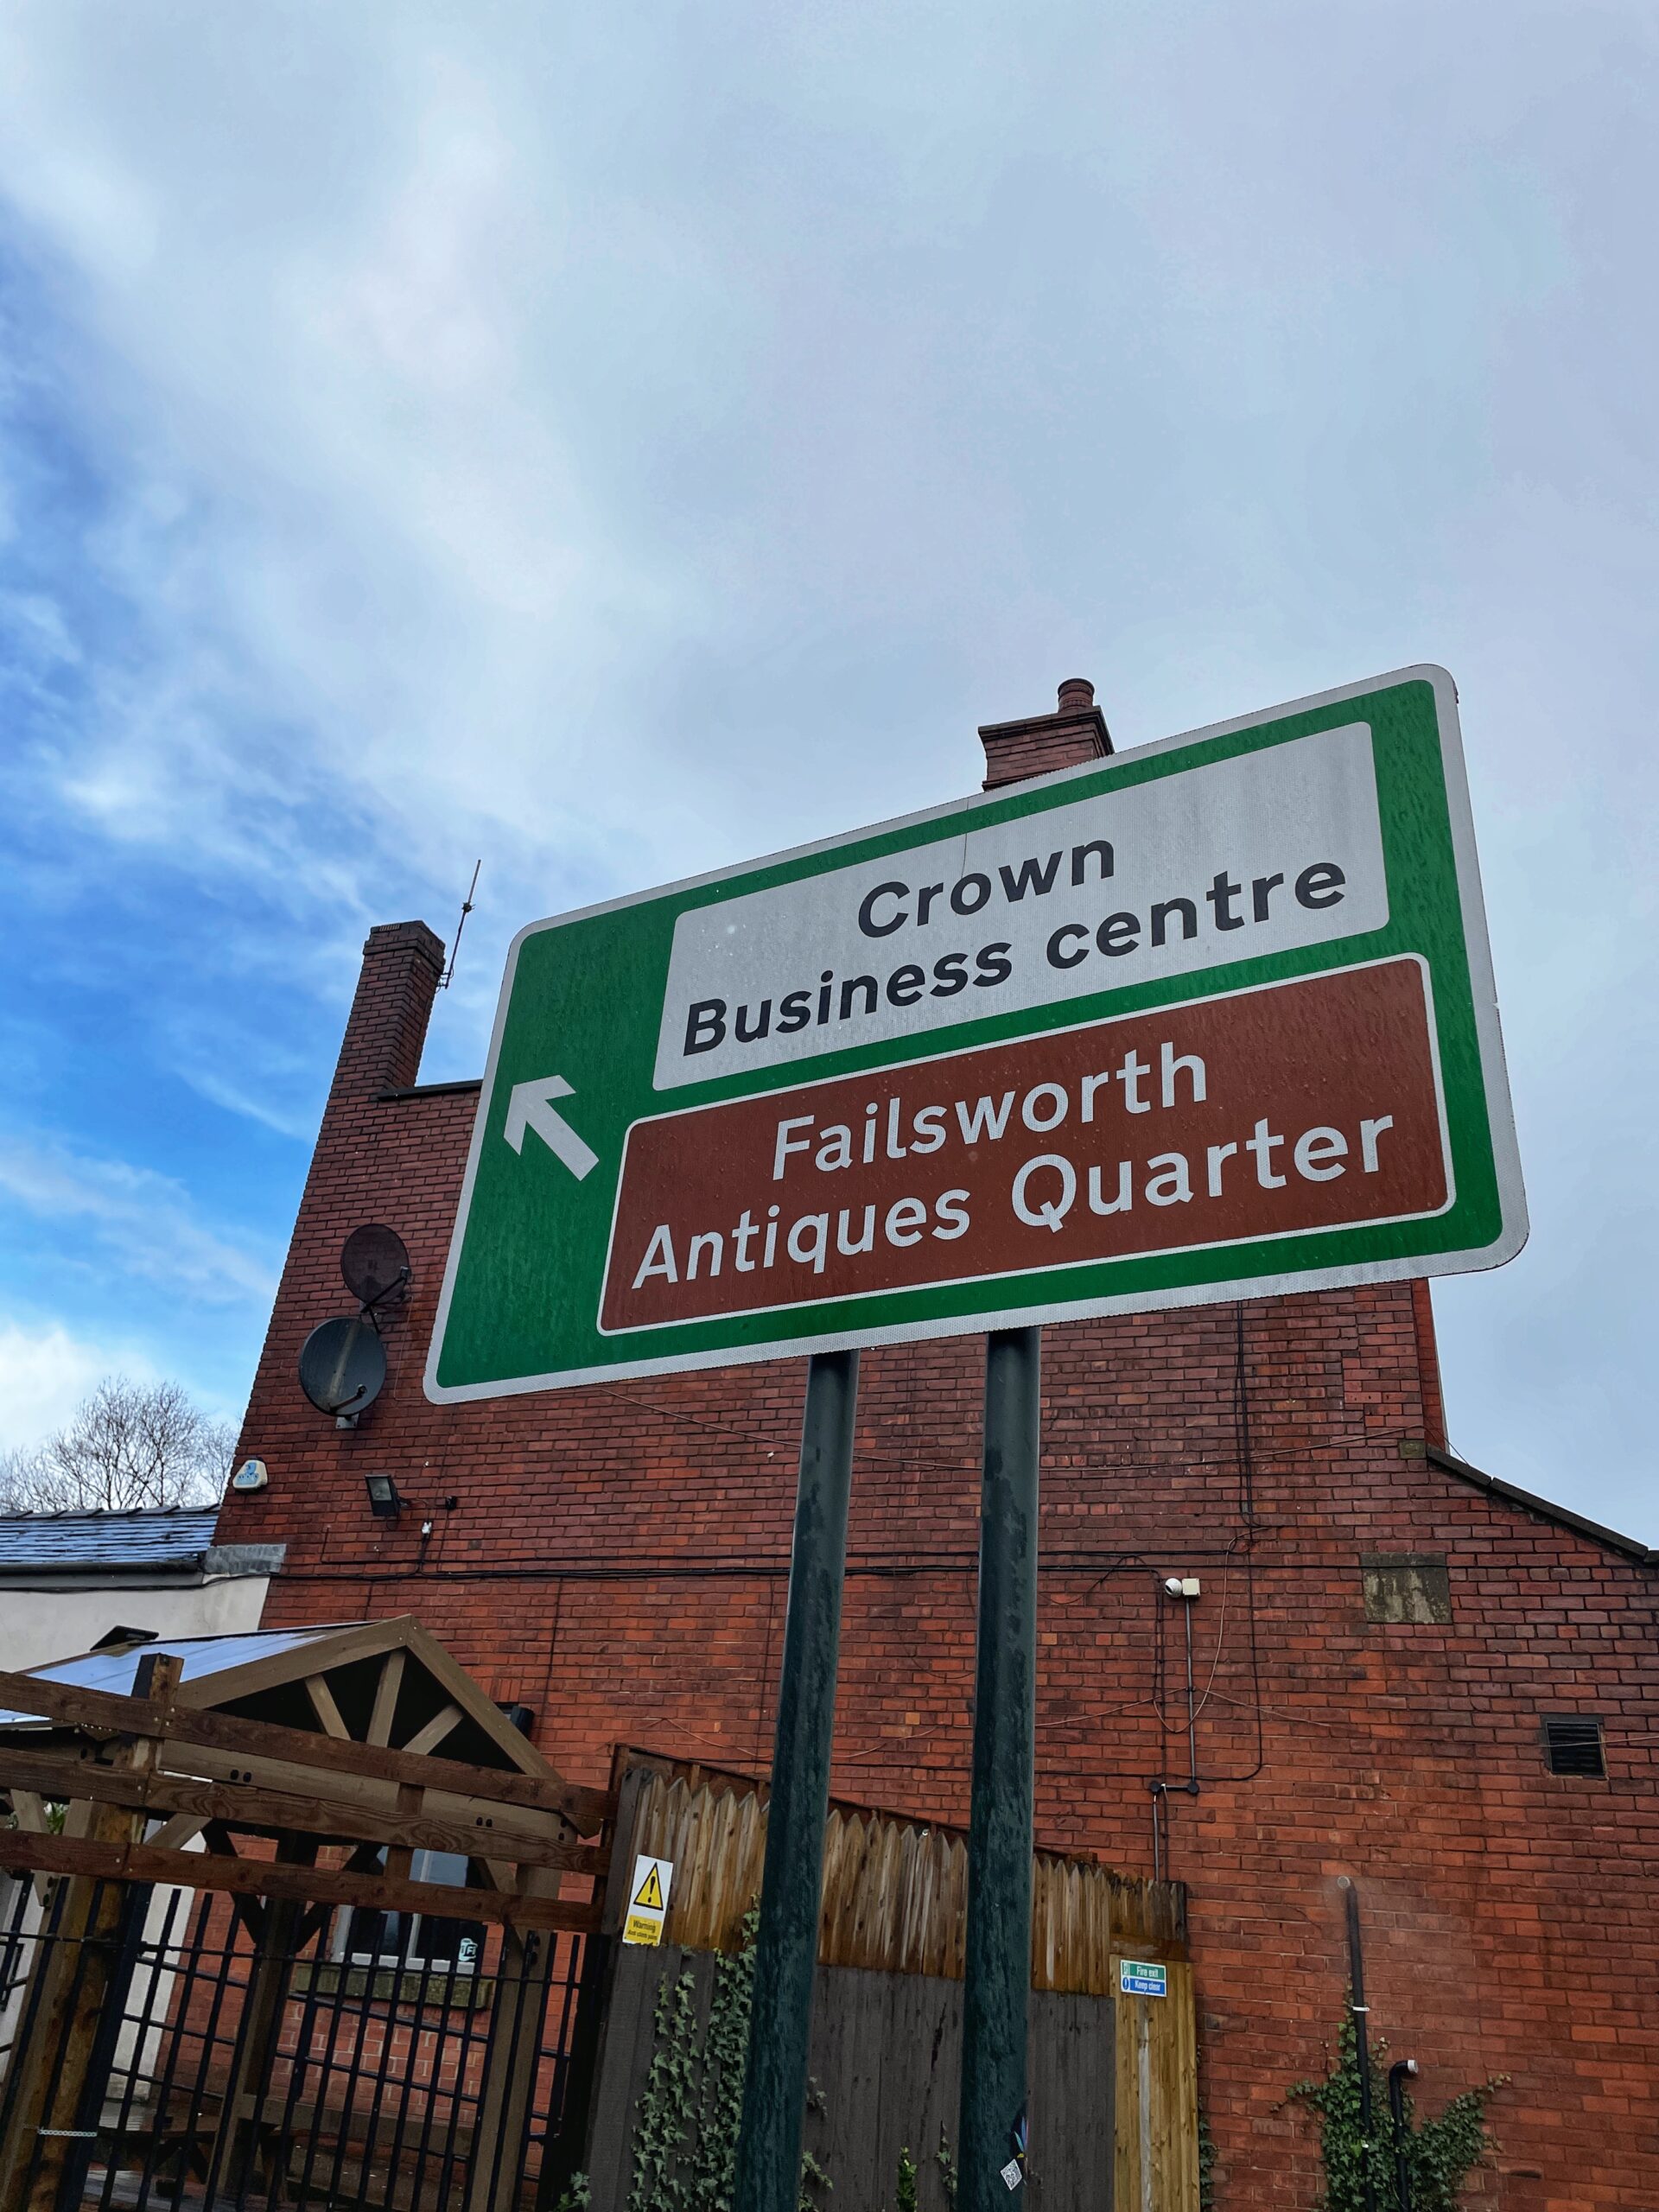 A sign officially marks the Failsworth Antiques Quarter. Credit: The Manc Group